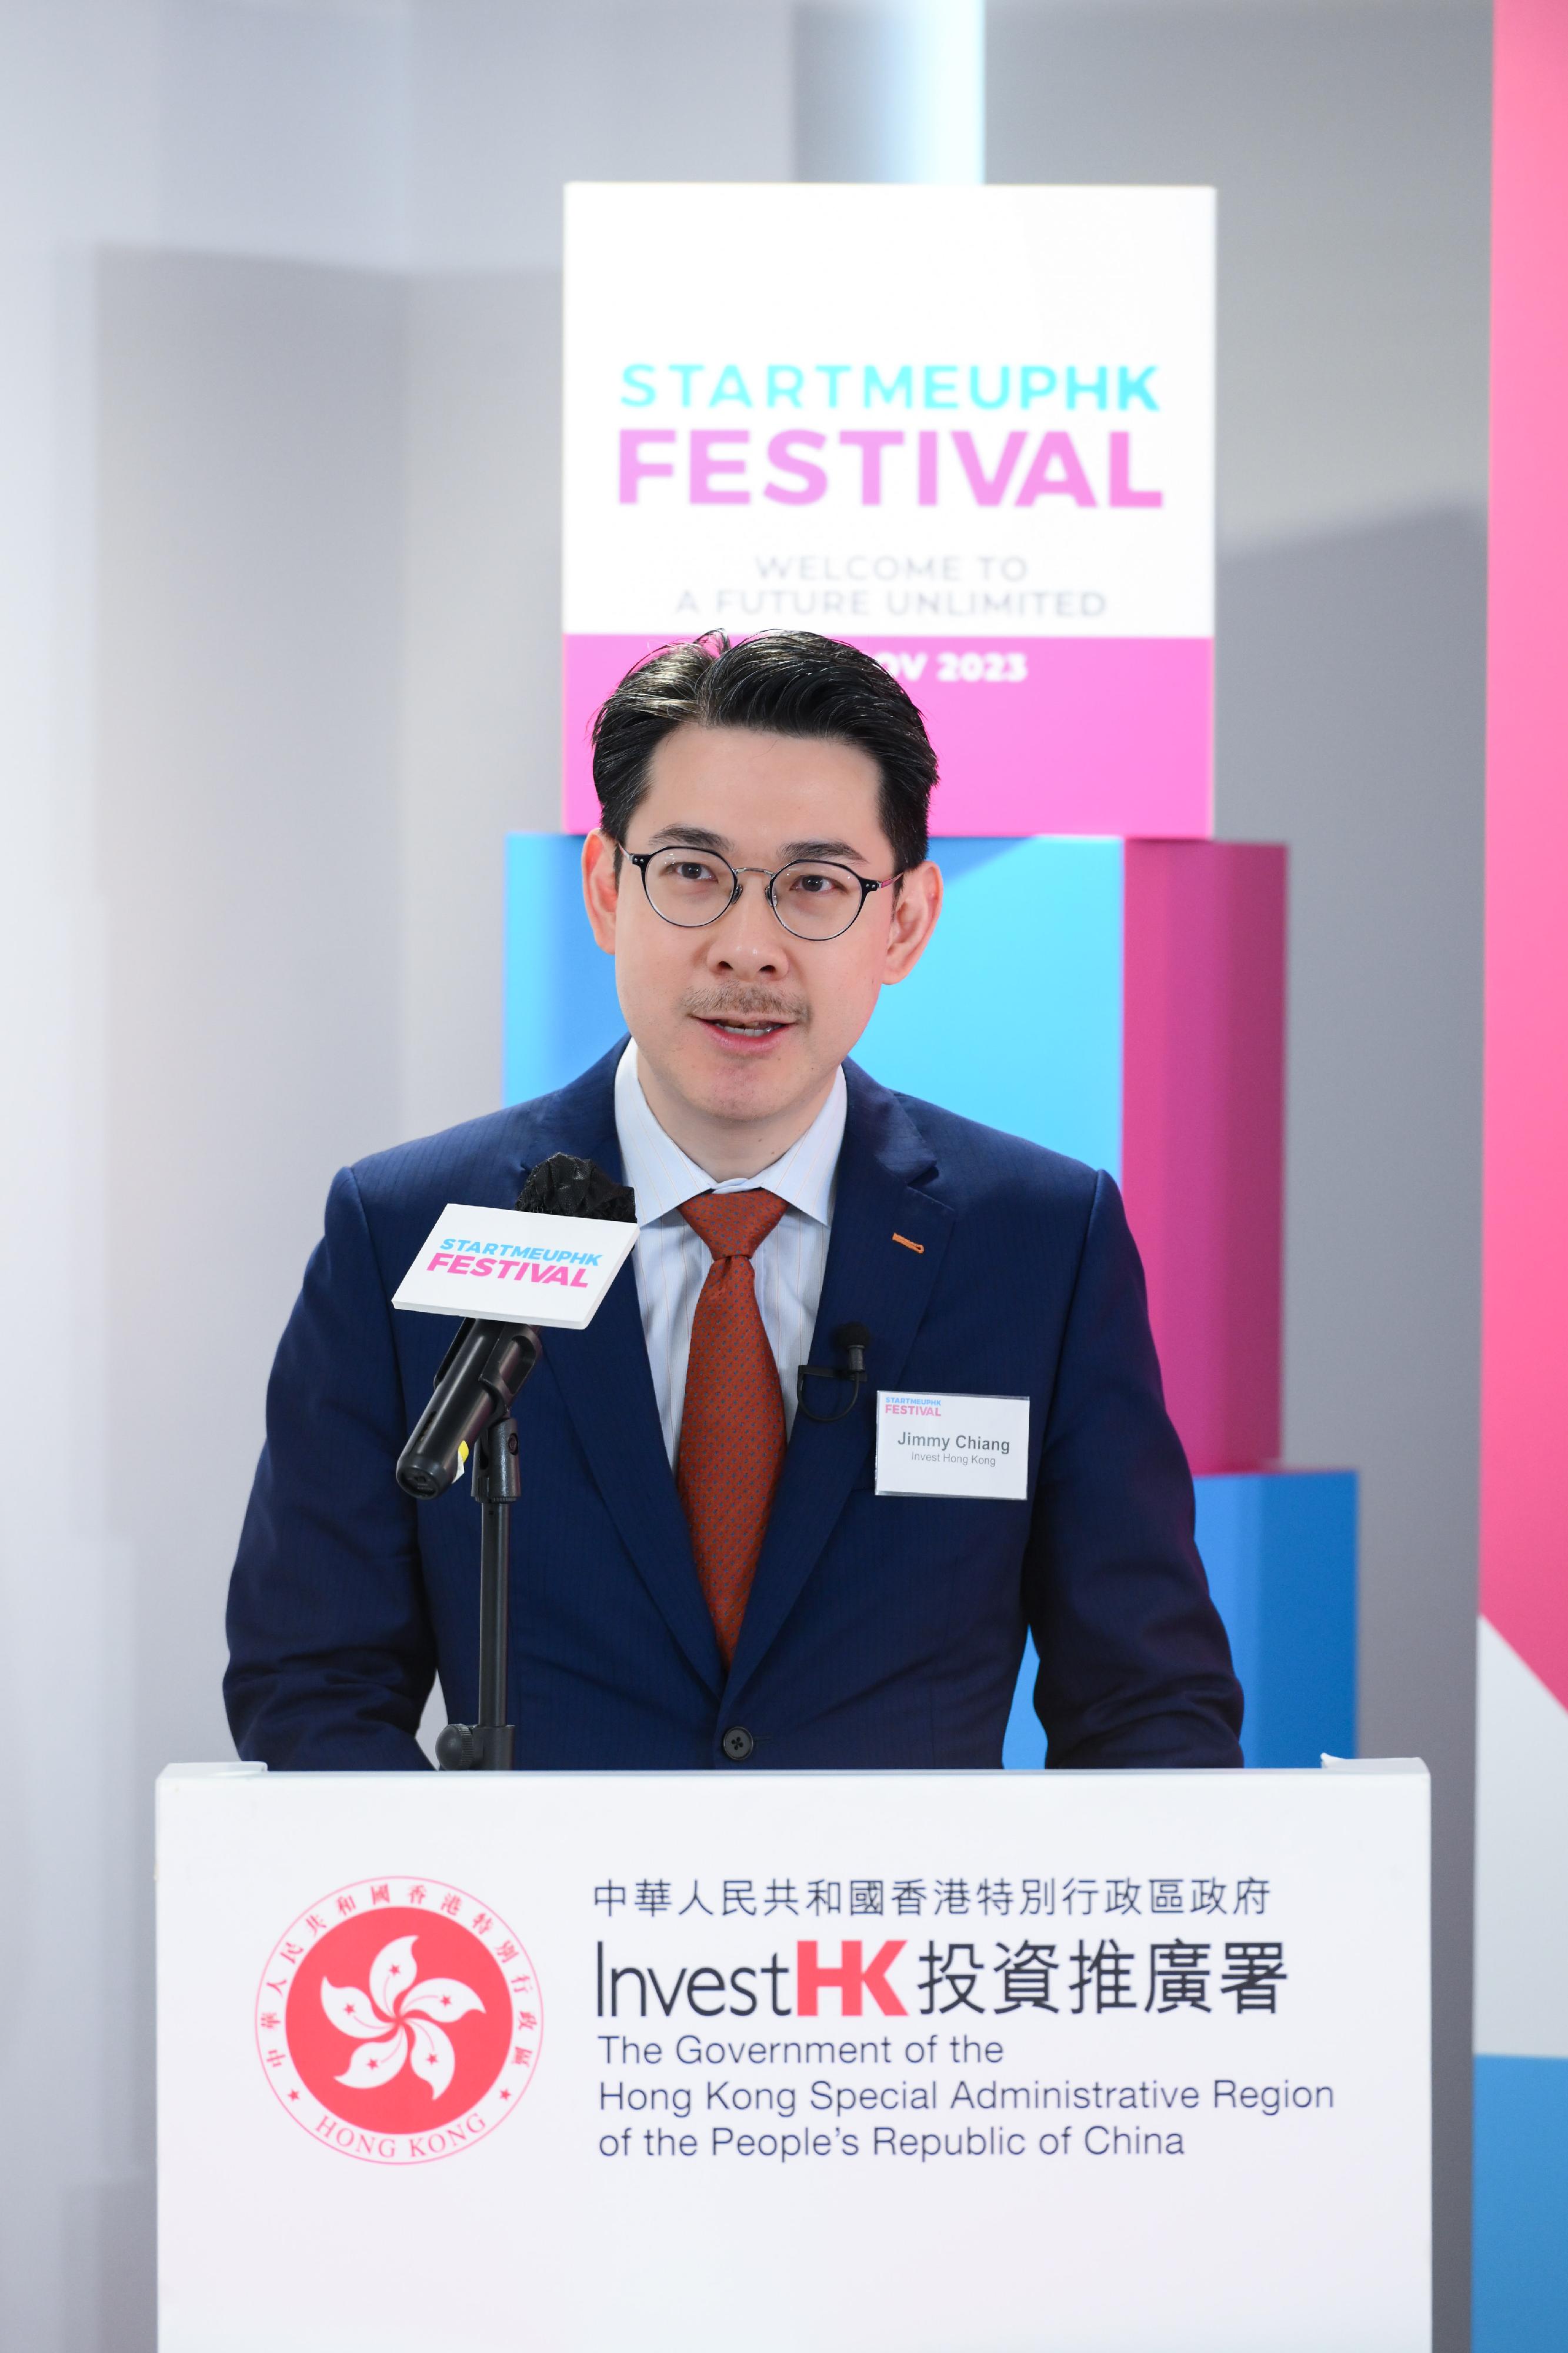 The Acting Director-General of Investment Promotion at Invest Hong Kong, Dr Jimmy Chiang, delivers welcome remarks at press conference of StartmeupHK Festival 2023.